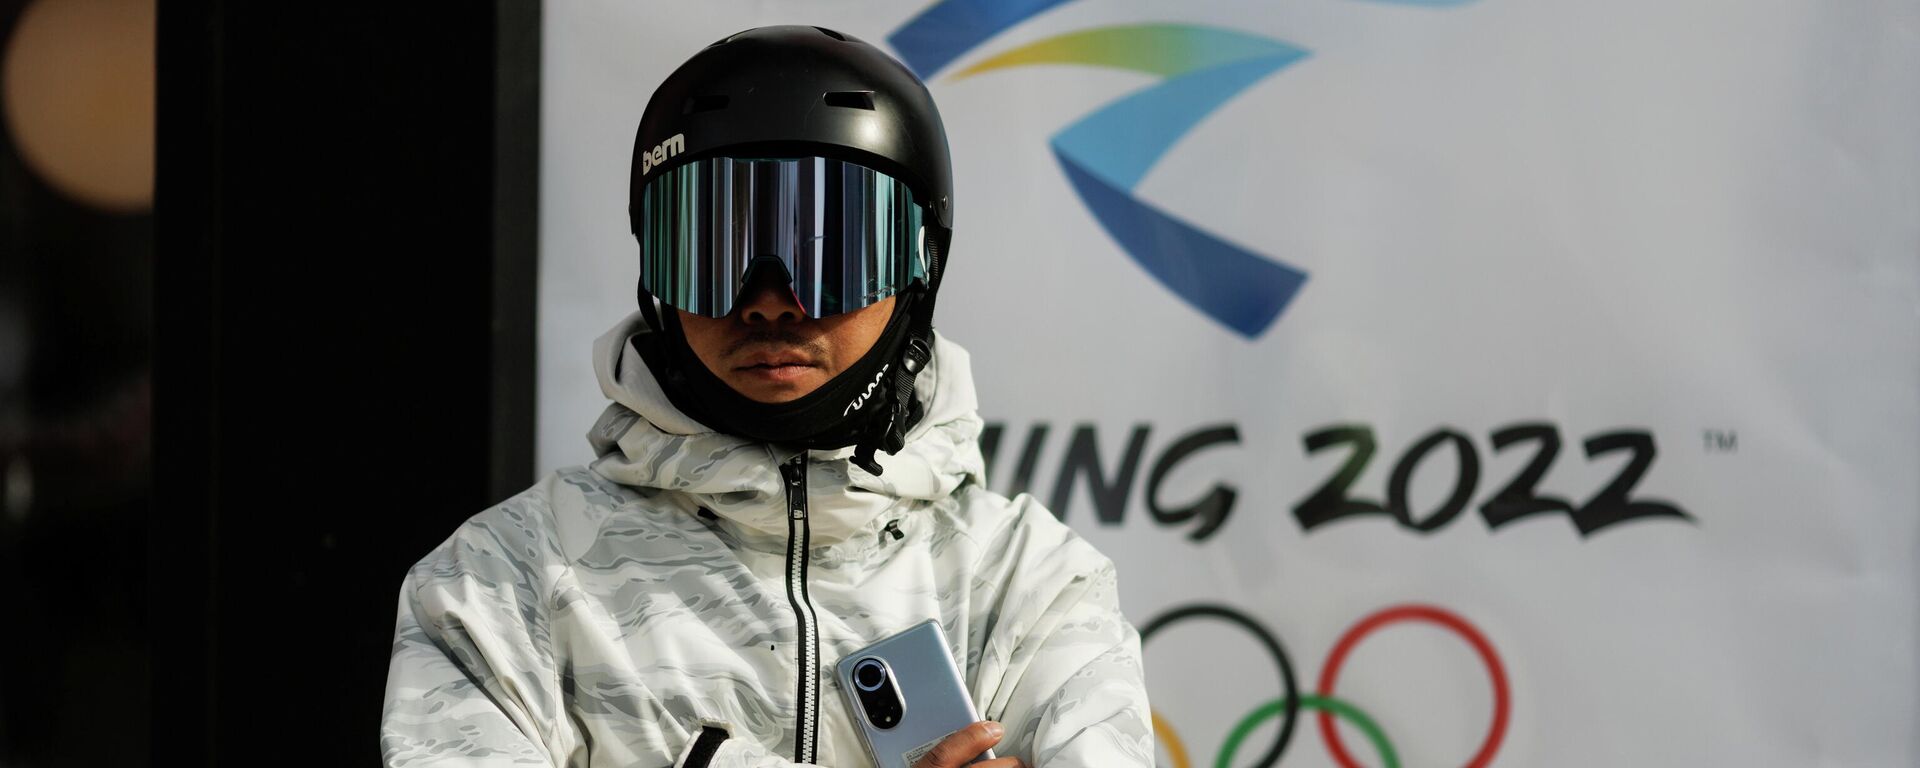 A snowboarder stands in front of the logo of the Beijing 2022 Winter Olympics in Zhangjiakou, Hebei province, China, November 20, 2021 - Sputnik International, 1920, 08.12.2021